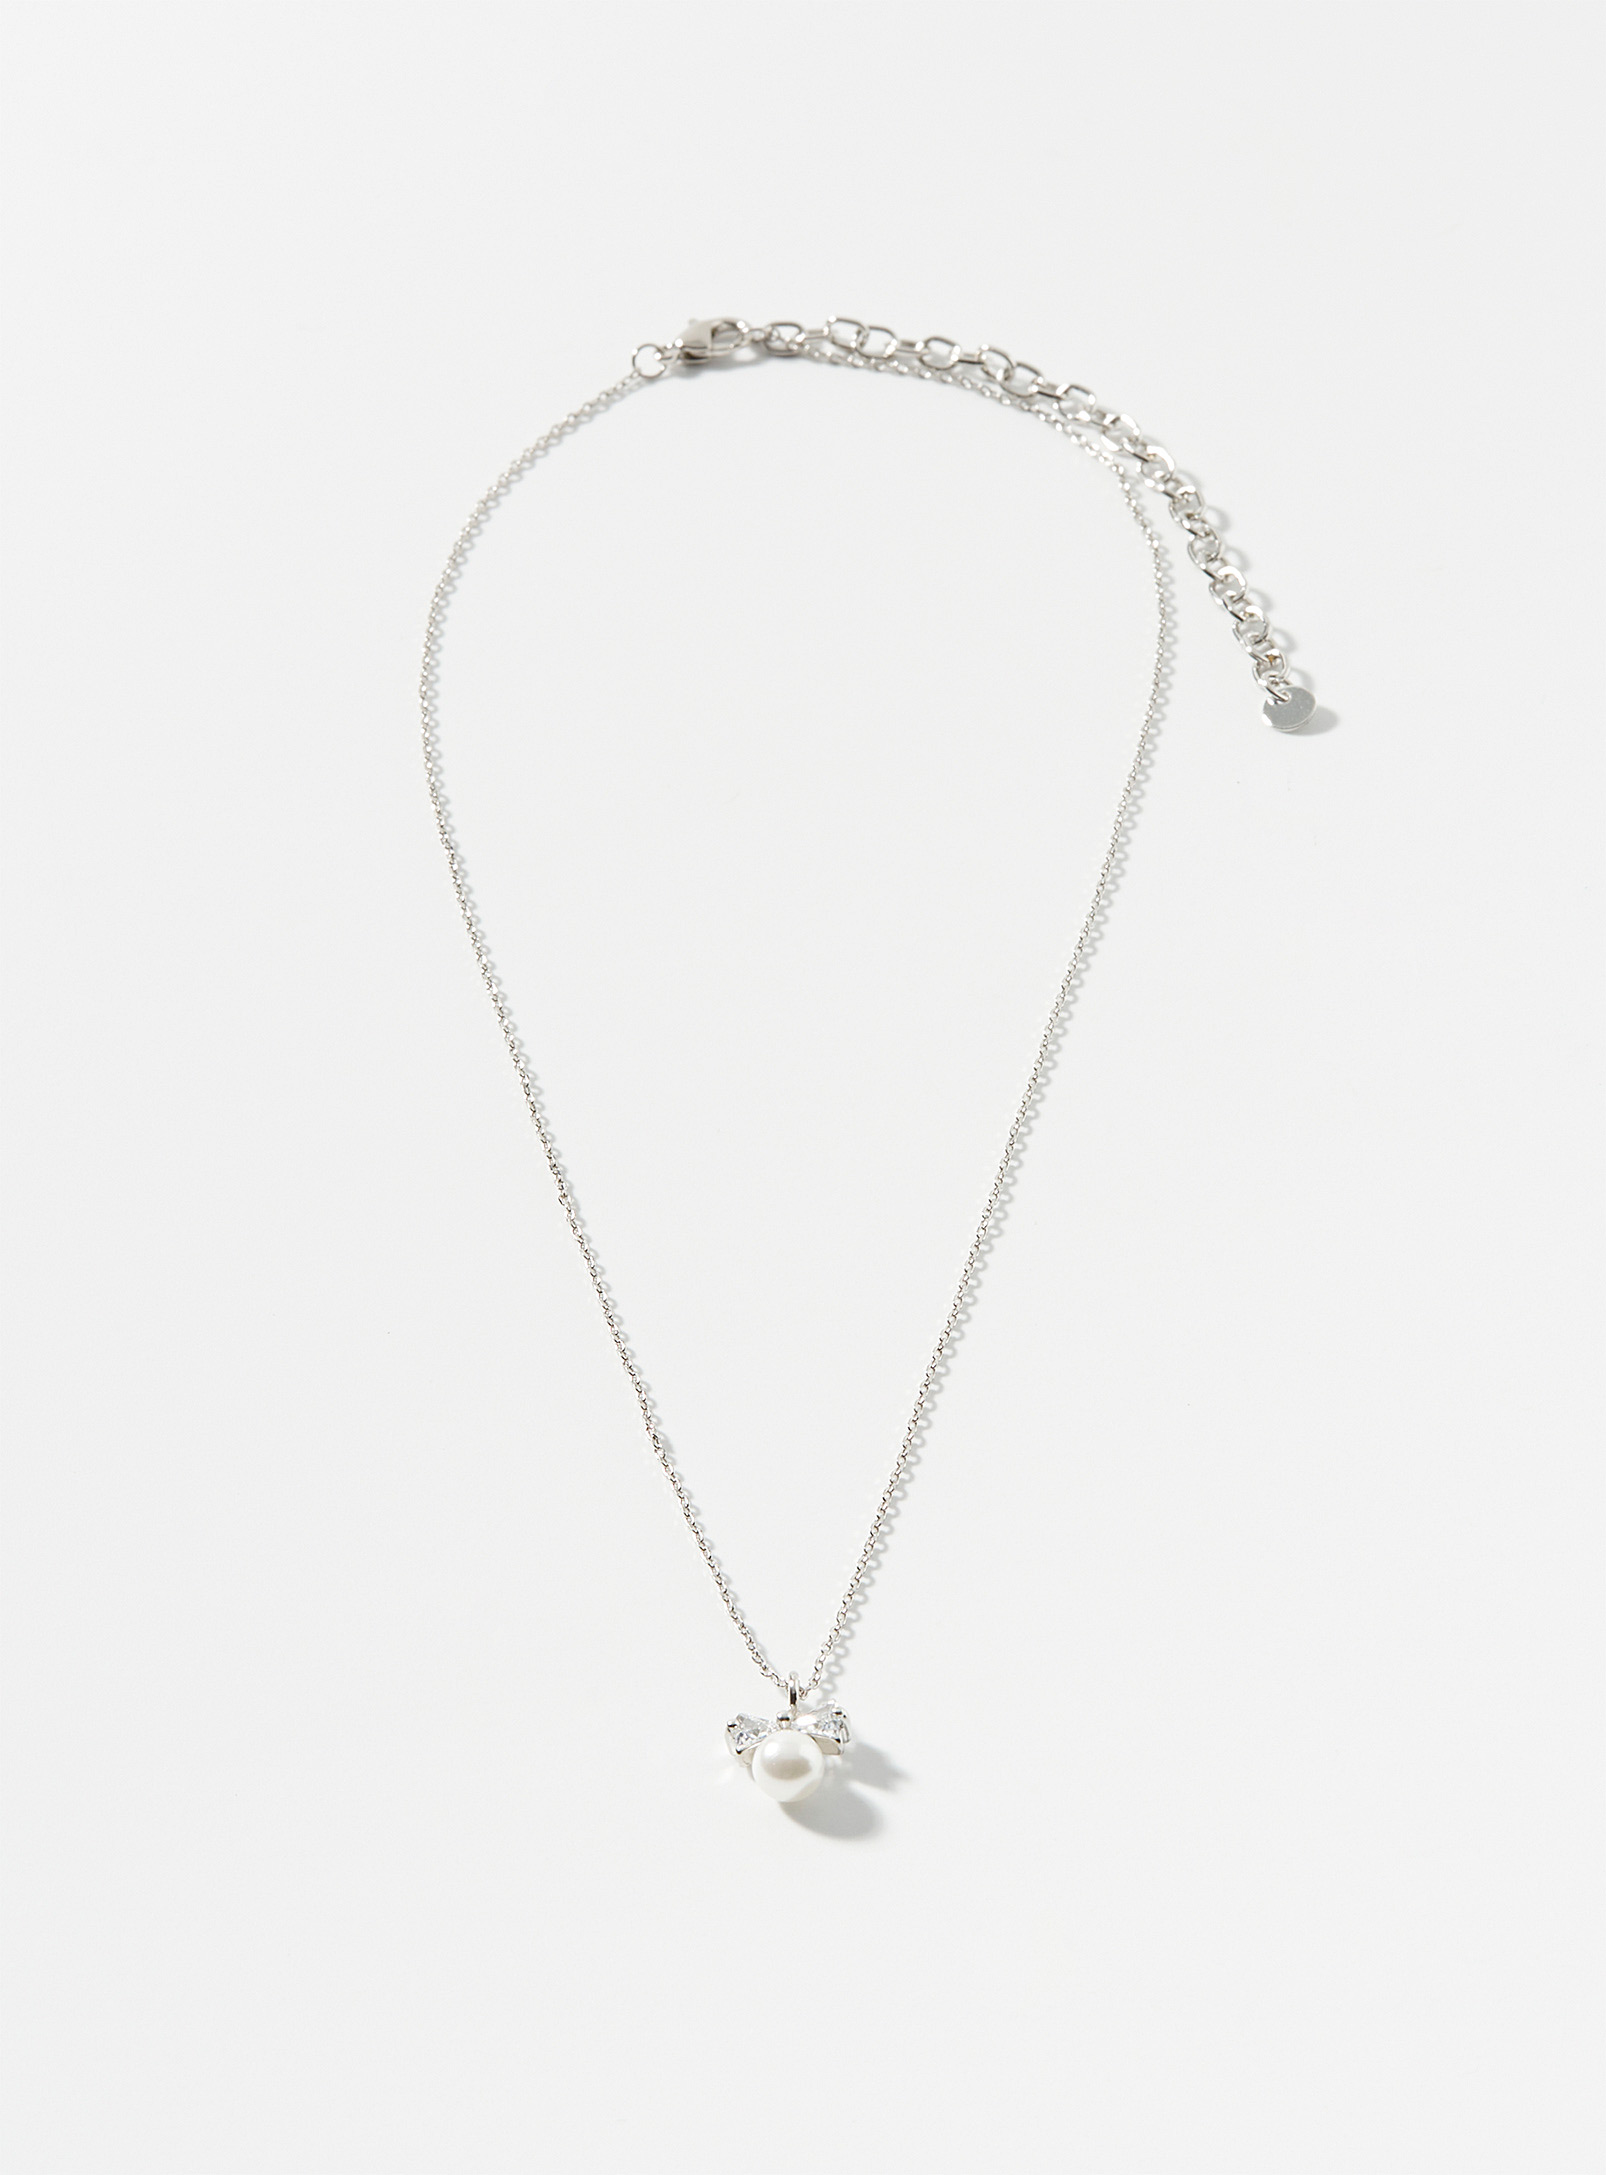 Simons - Women's Small shimmery bow chain